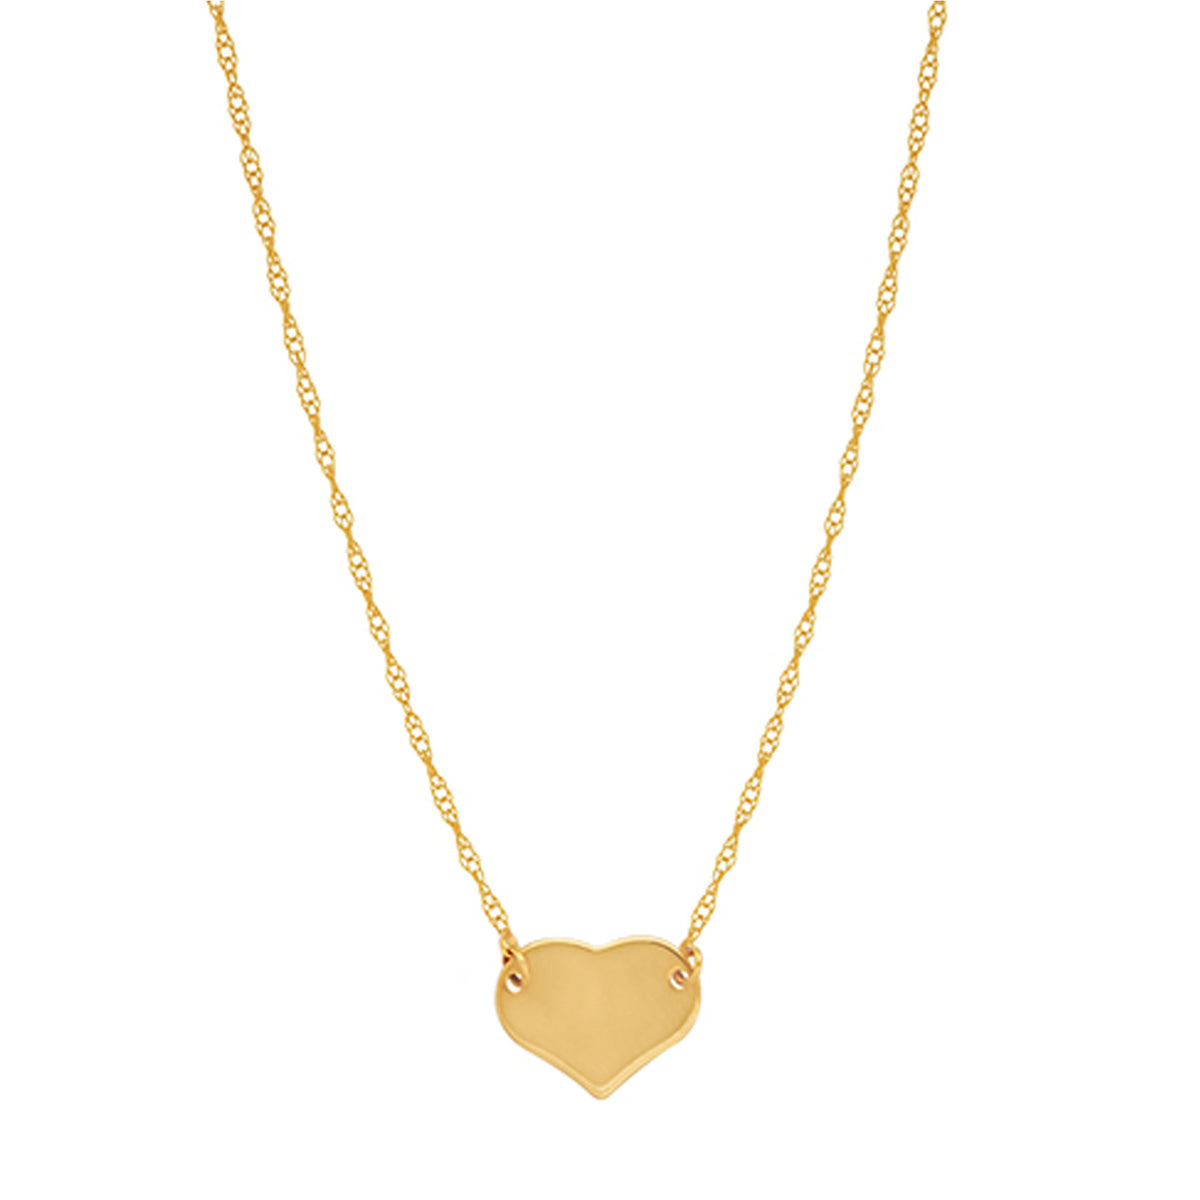 14K Yellow Gold Mini Heart Pendant Necklace, 16" To 18" Adjustable fine designer jewelry for men and women